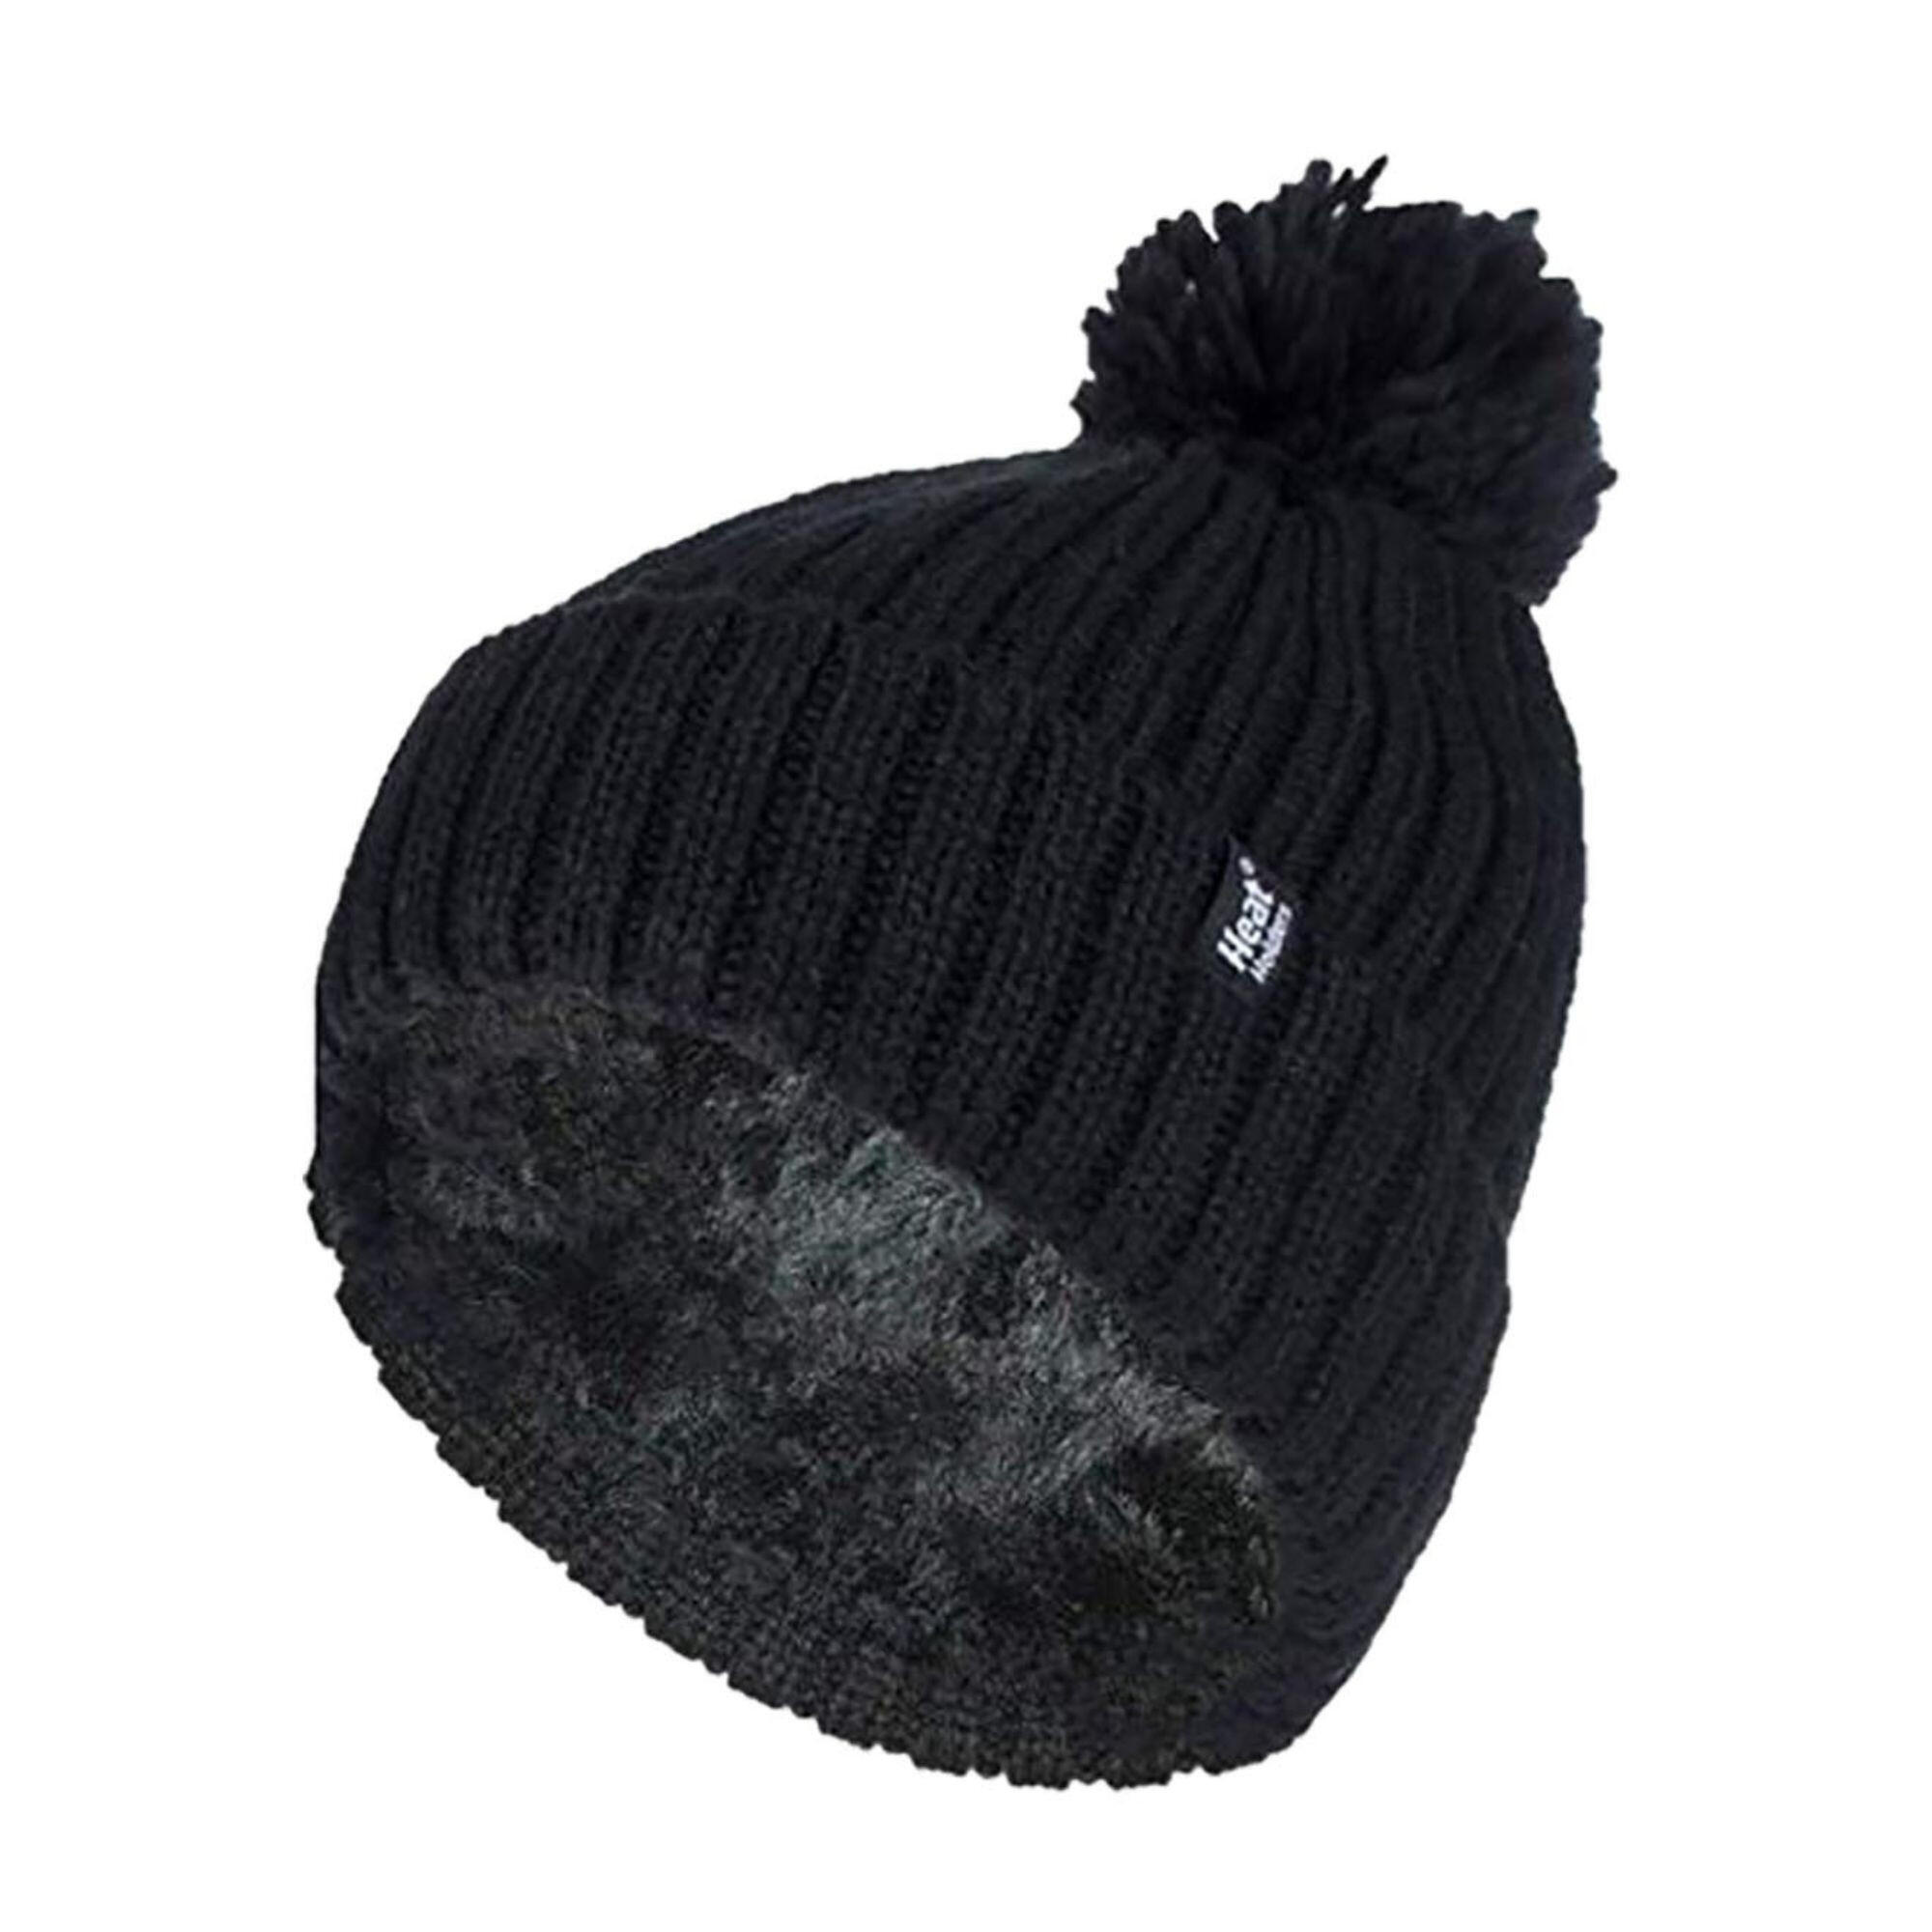 HEAT HOLDERS Ladies Ribbed Cuffed Thermal Insulated Winter Pom Pom Bobble Hat